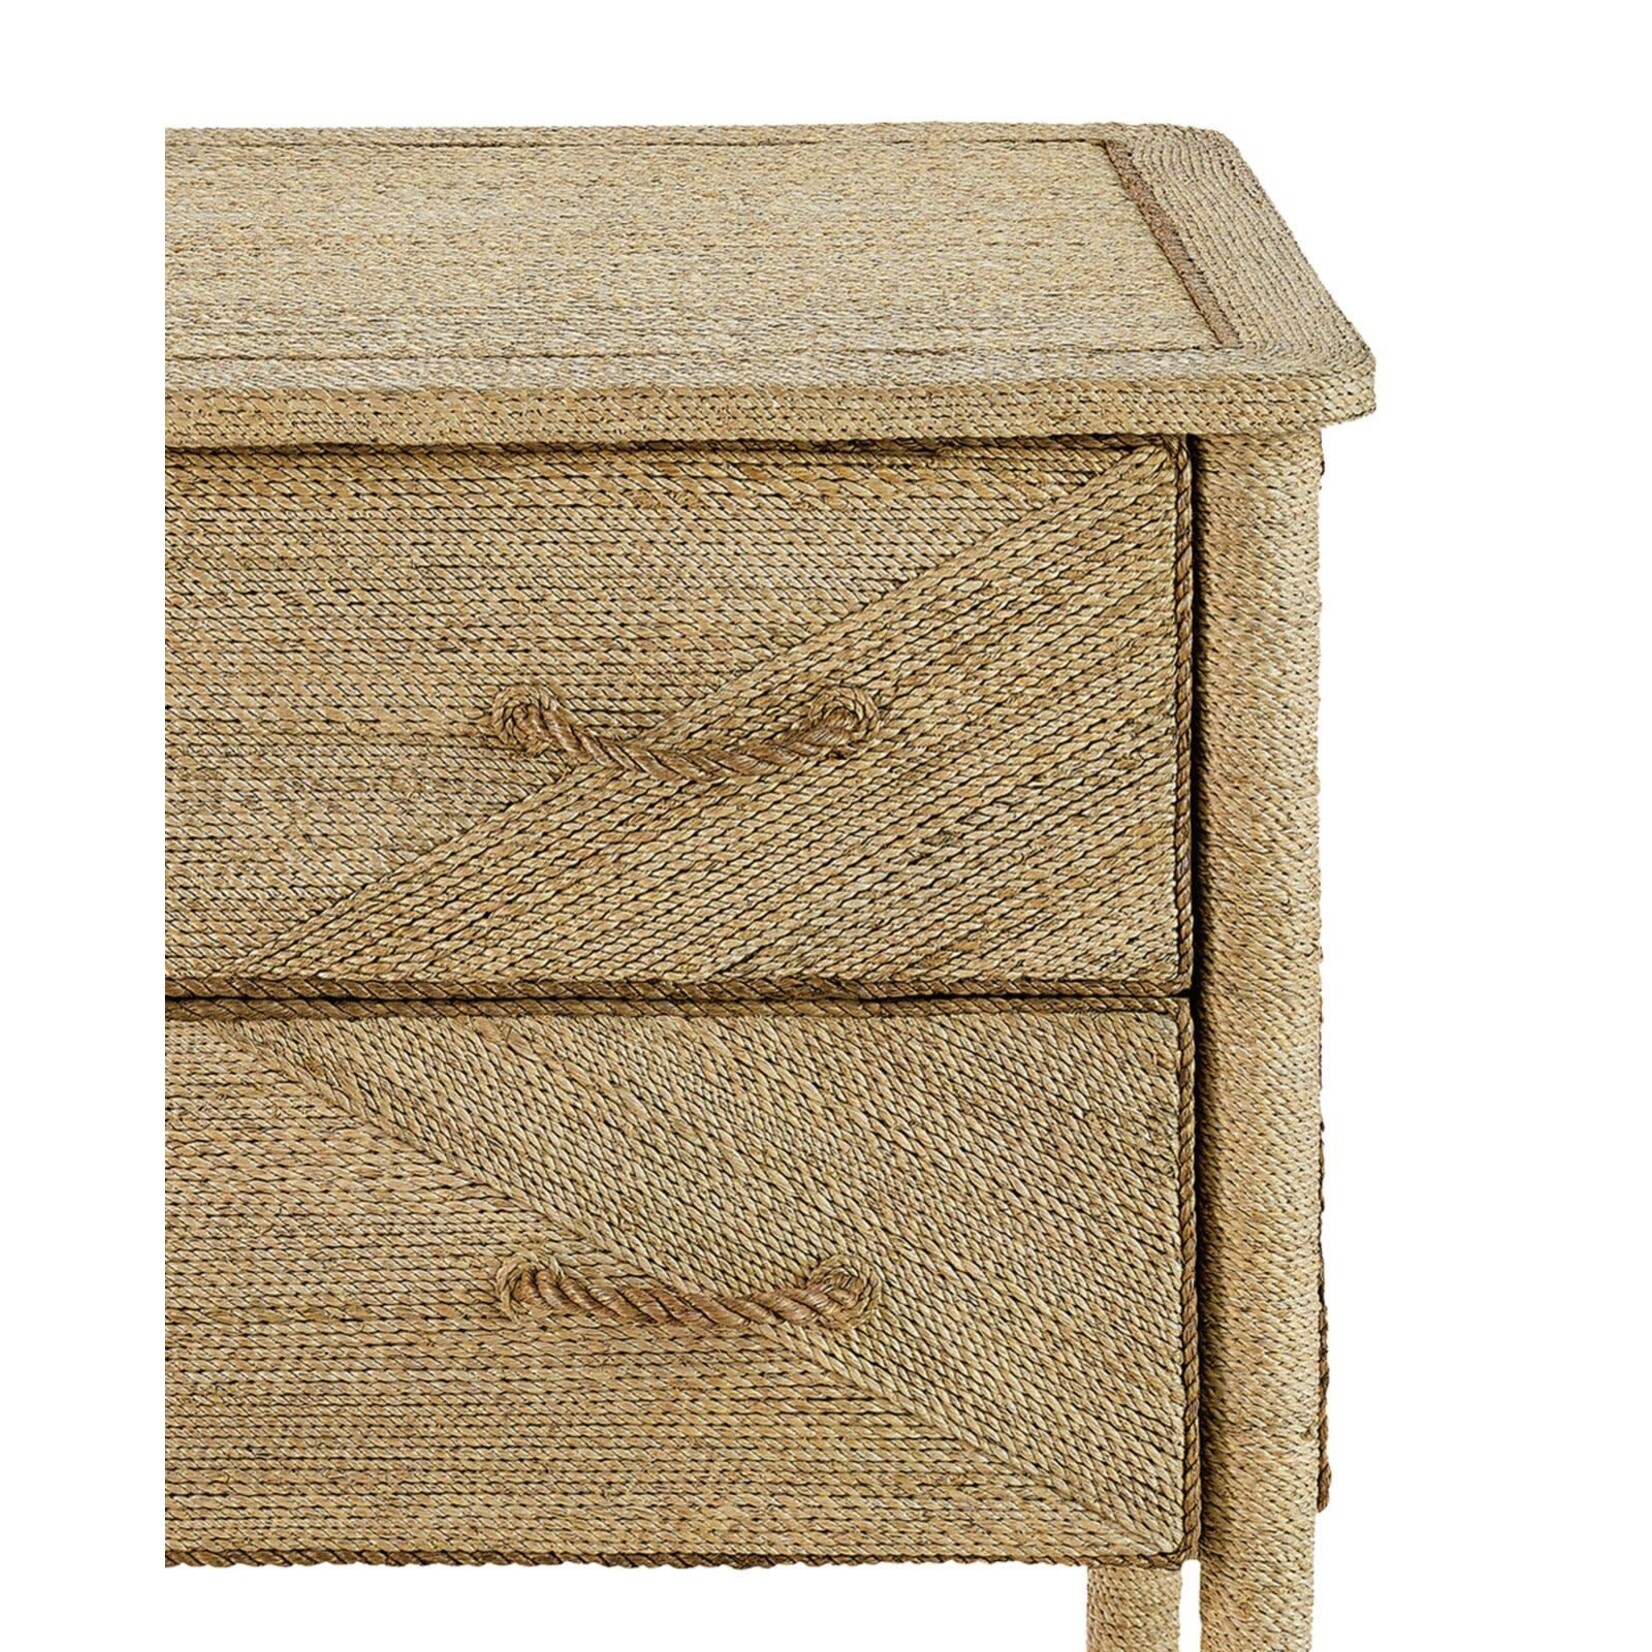 Outside The Box 36x22x31 Currey & Co Kaipo Natural Abaca Rope & Wood 2 Drawer Chest